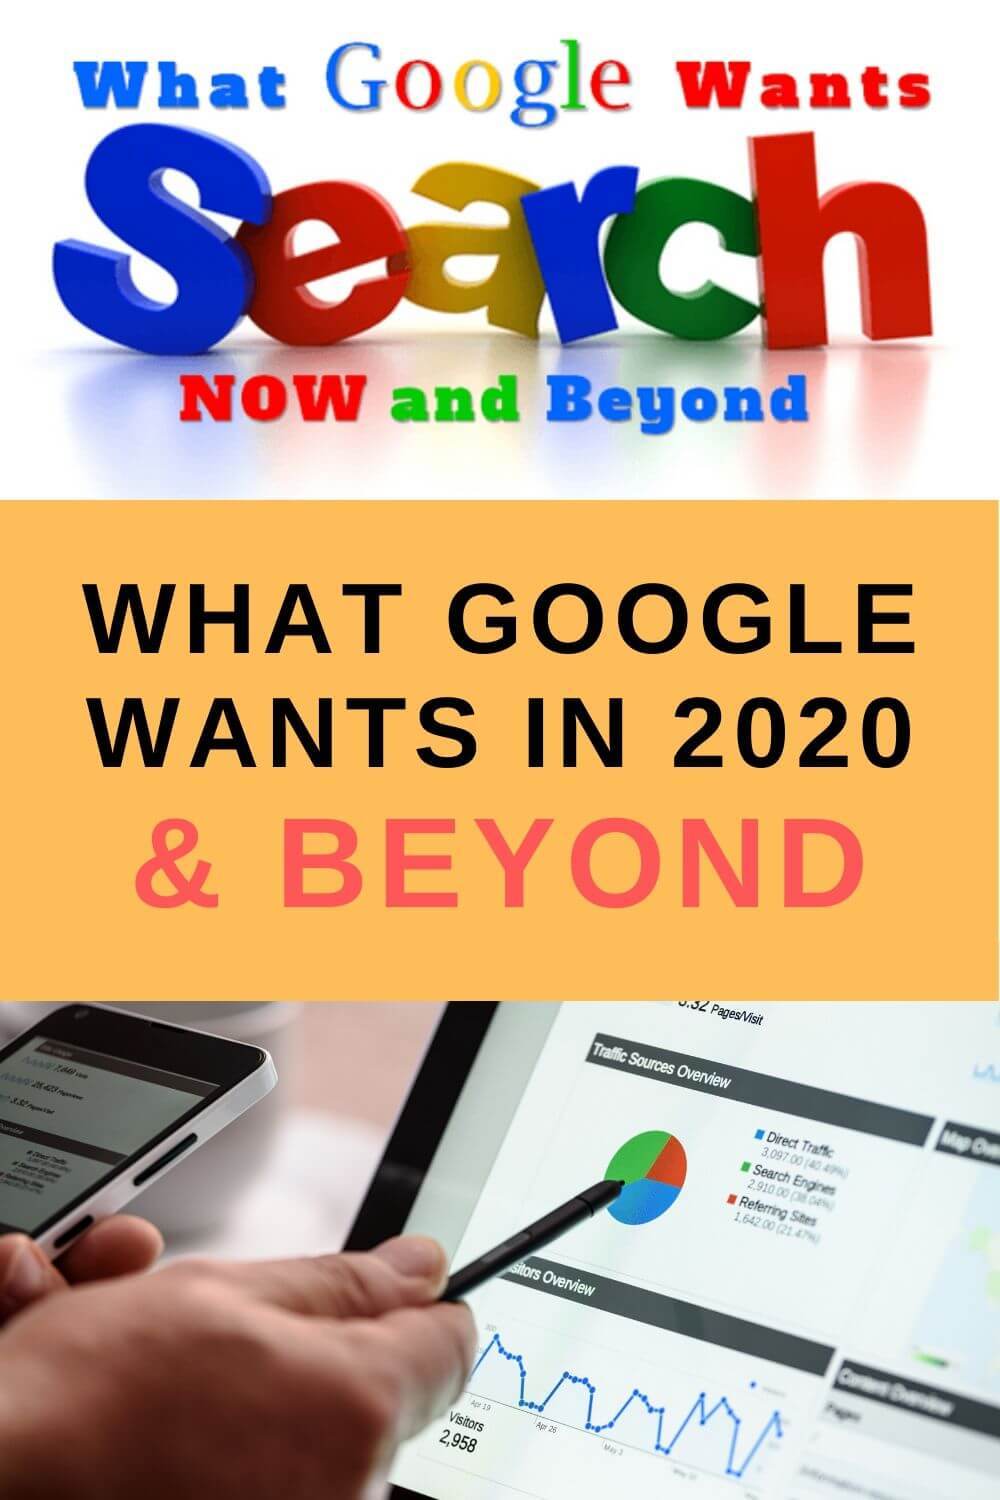 What Google Wants in 2020 and Beyond